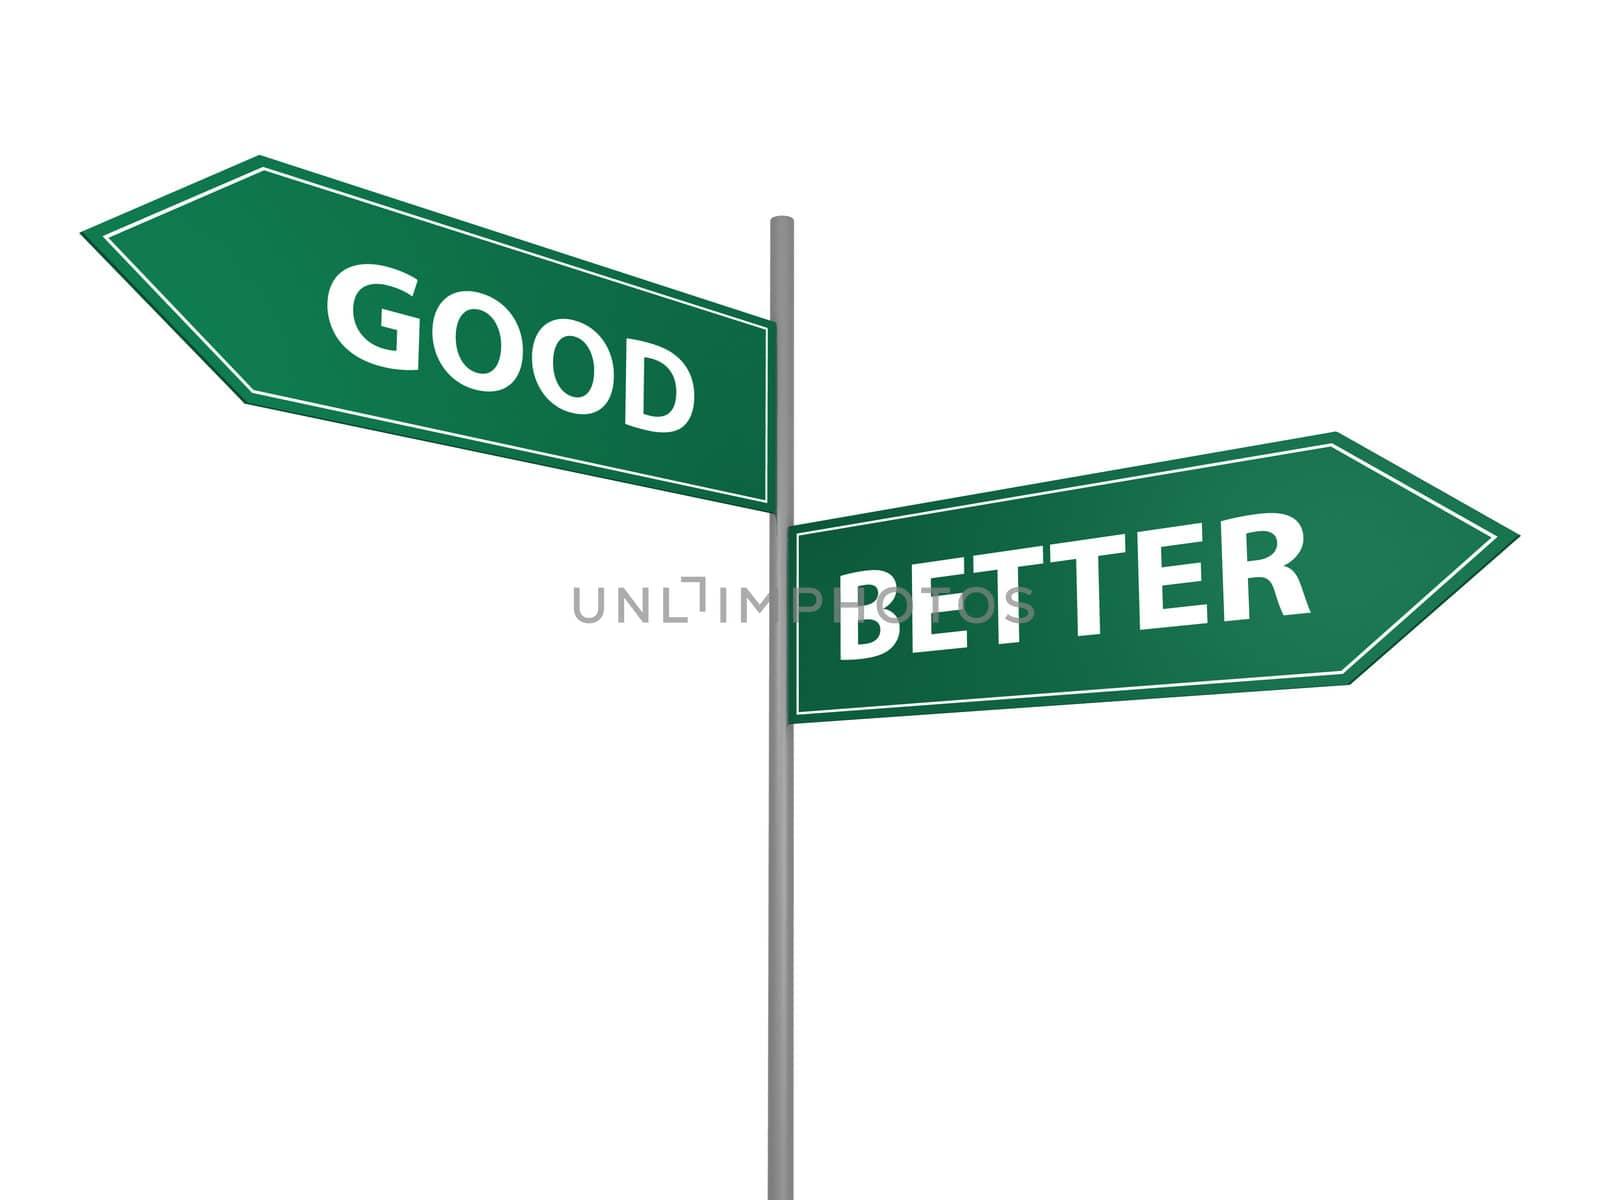 Good and better signs on white background.